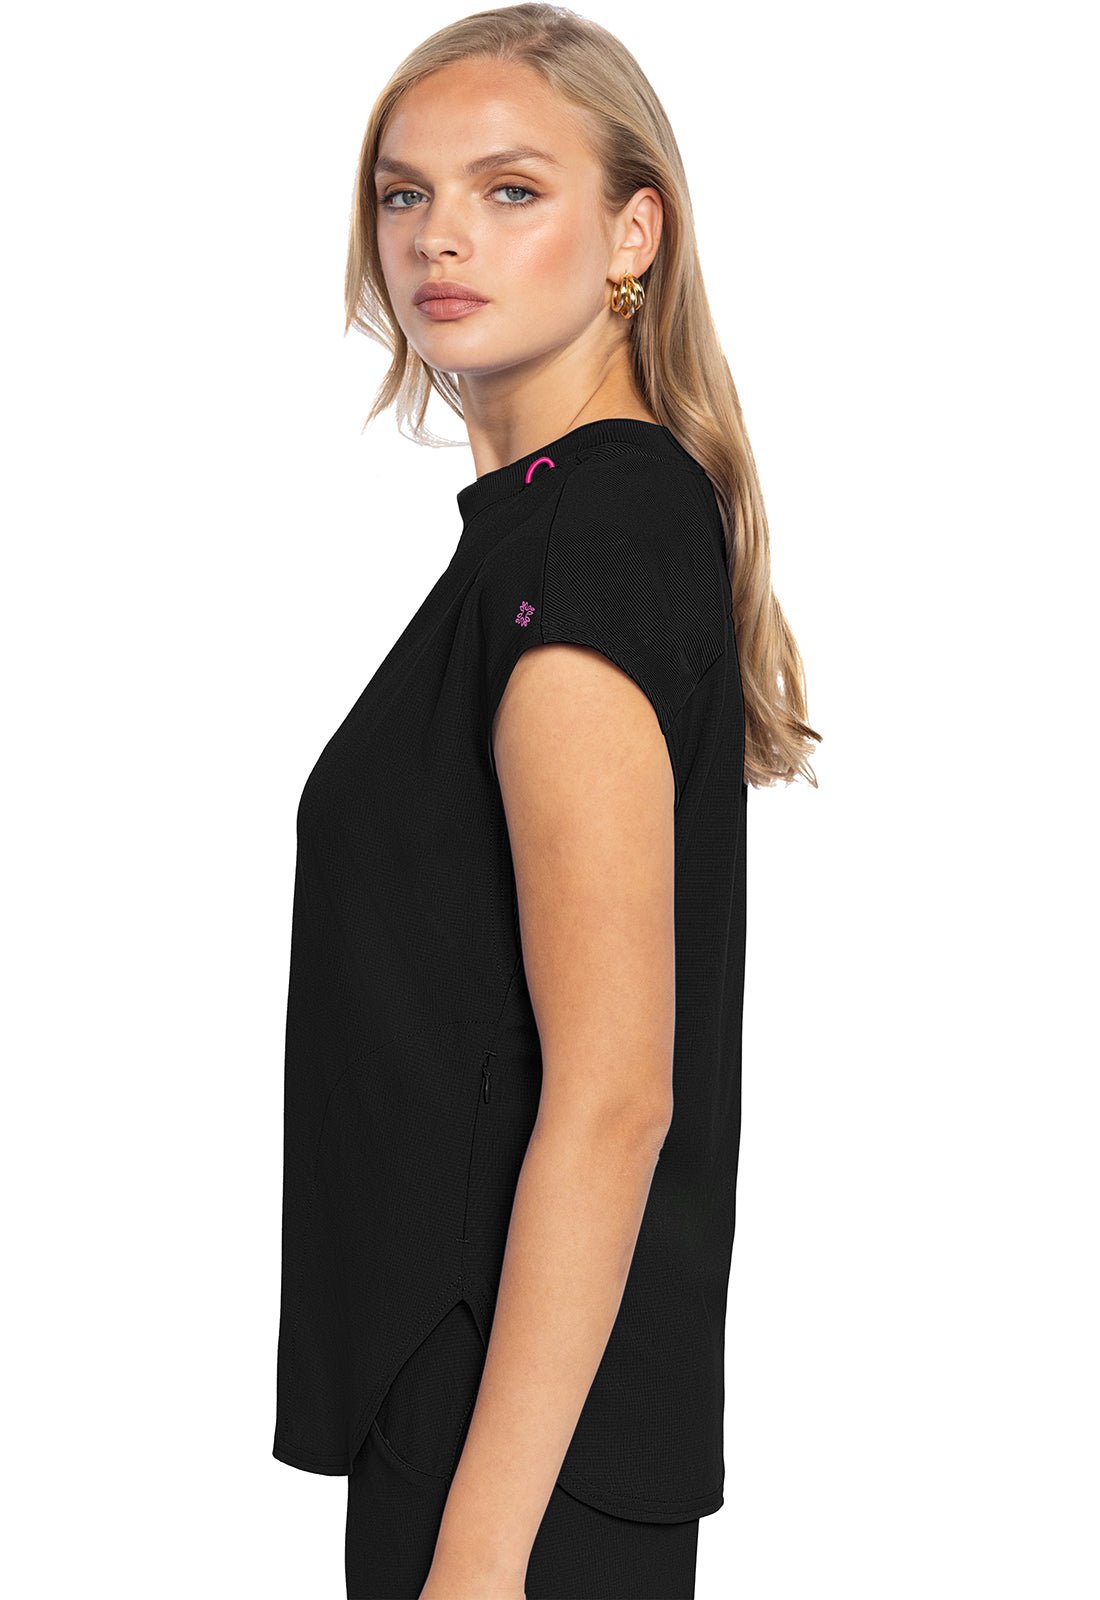 Med Couture Amp Round Neck Scrub Top MC703 in Black, Hyper Blue, Magenta, Navy, Pewter - Scrubs Select